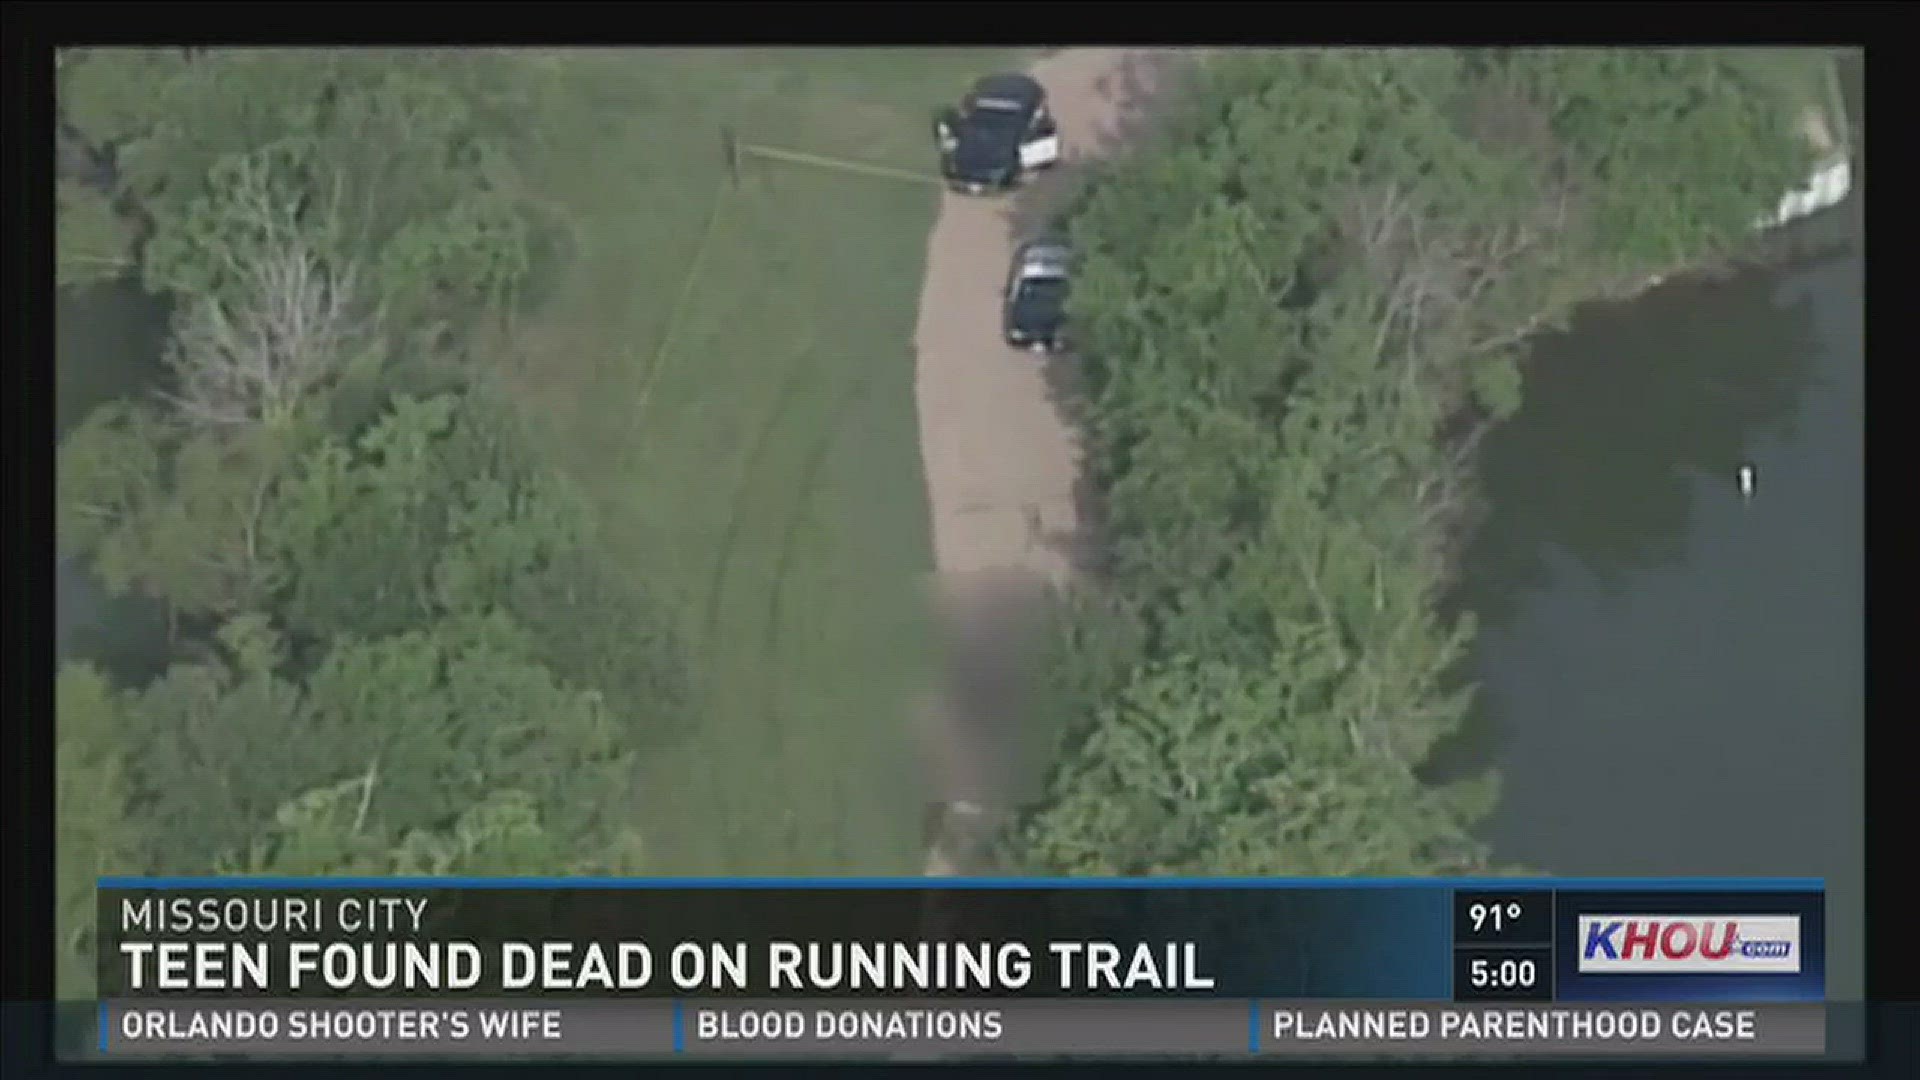 The 16-year-old was found shot to death on a running trail in Missouri City.